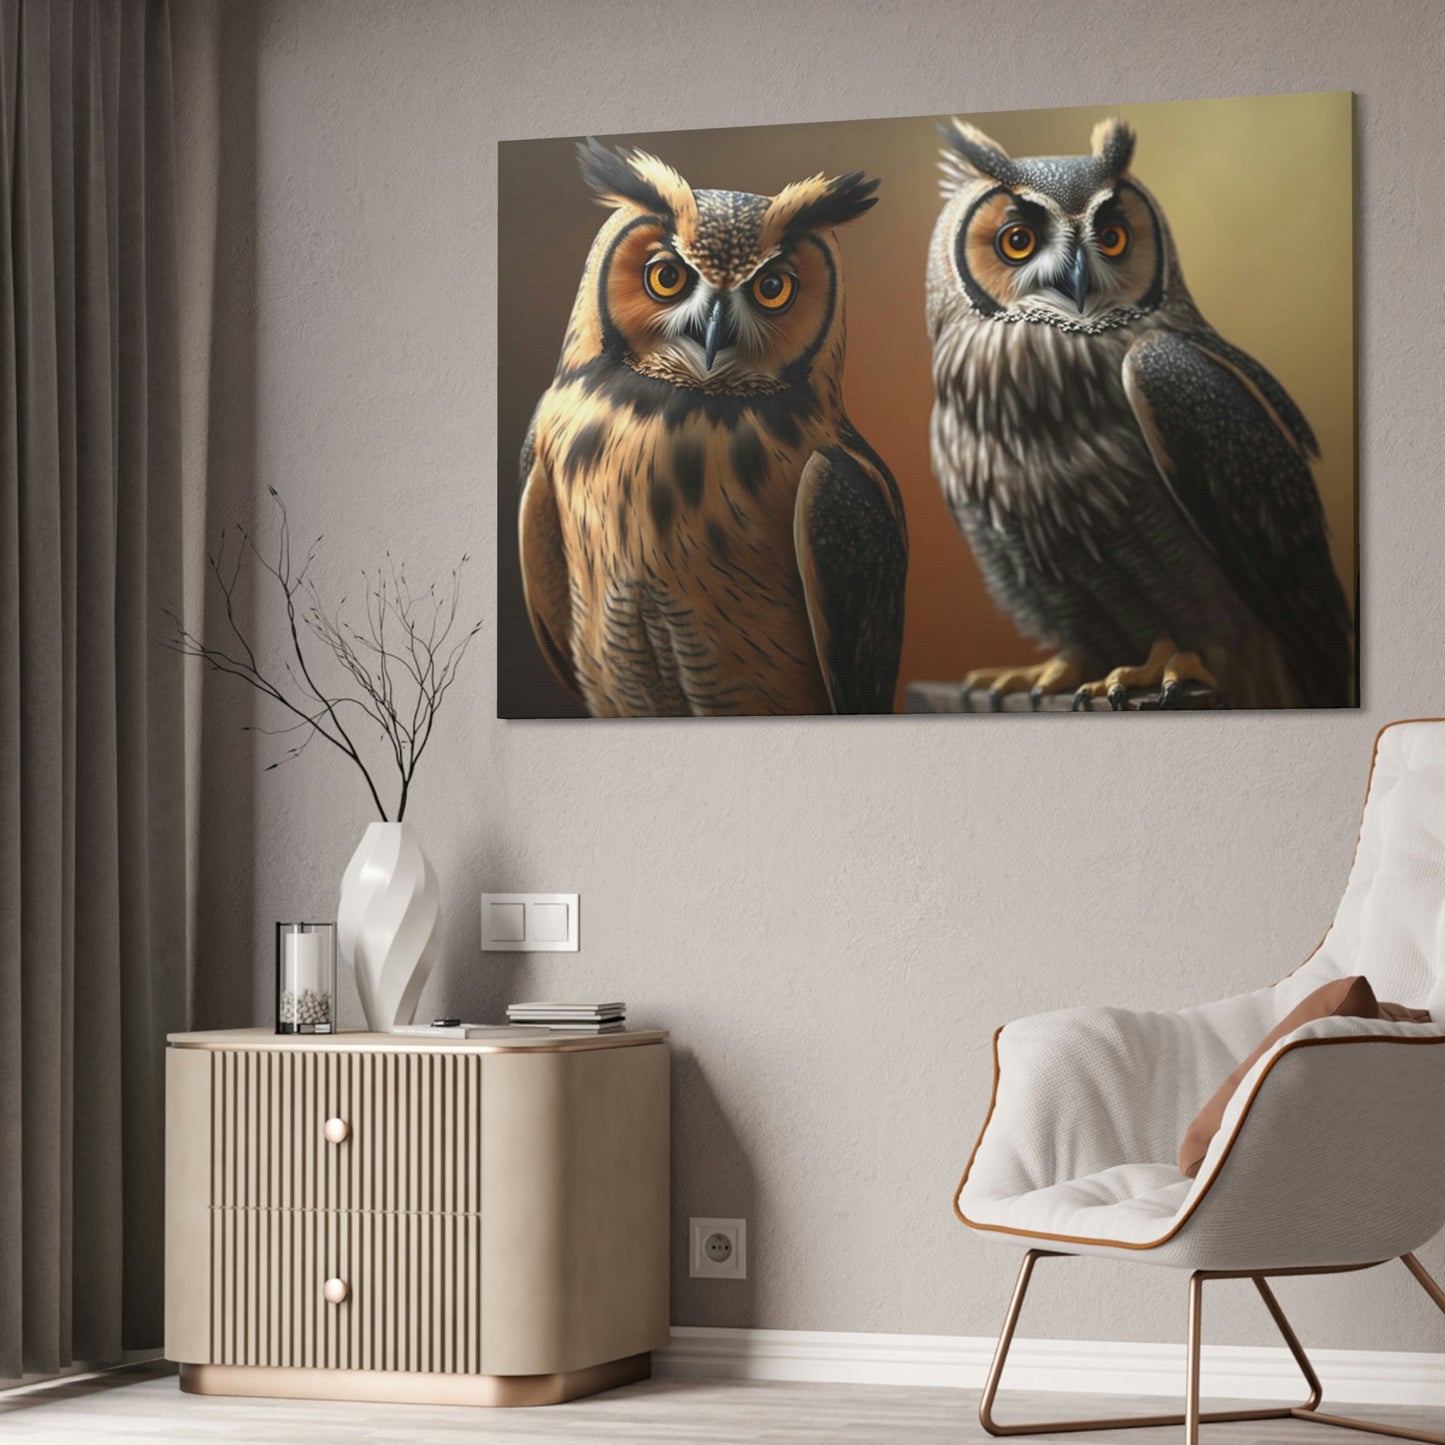 Guardians of the Forest: Ethereal Owls Gaze Out from the Canvas